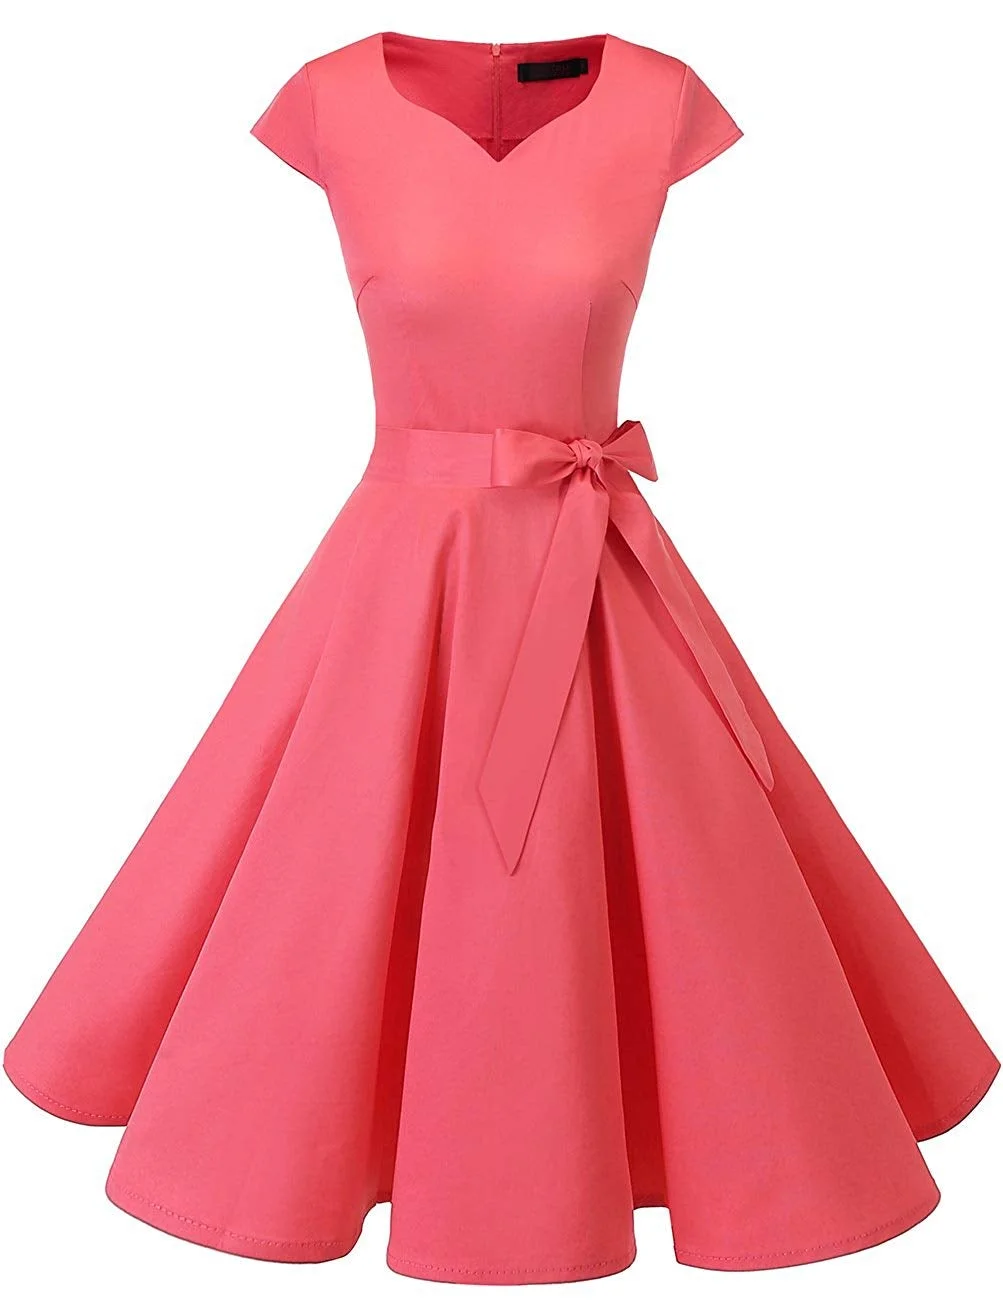 Vintage Dress Women's Tea Dress Prom Swing Cocktail Party Dress with Cap-Sleeves